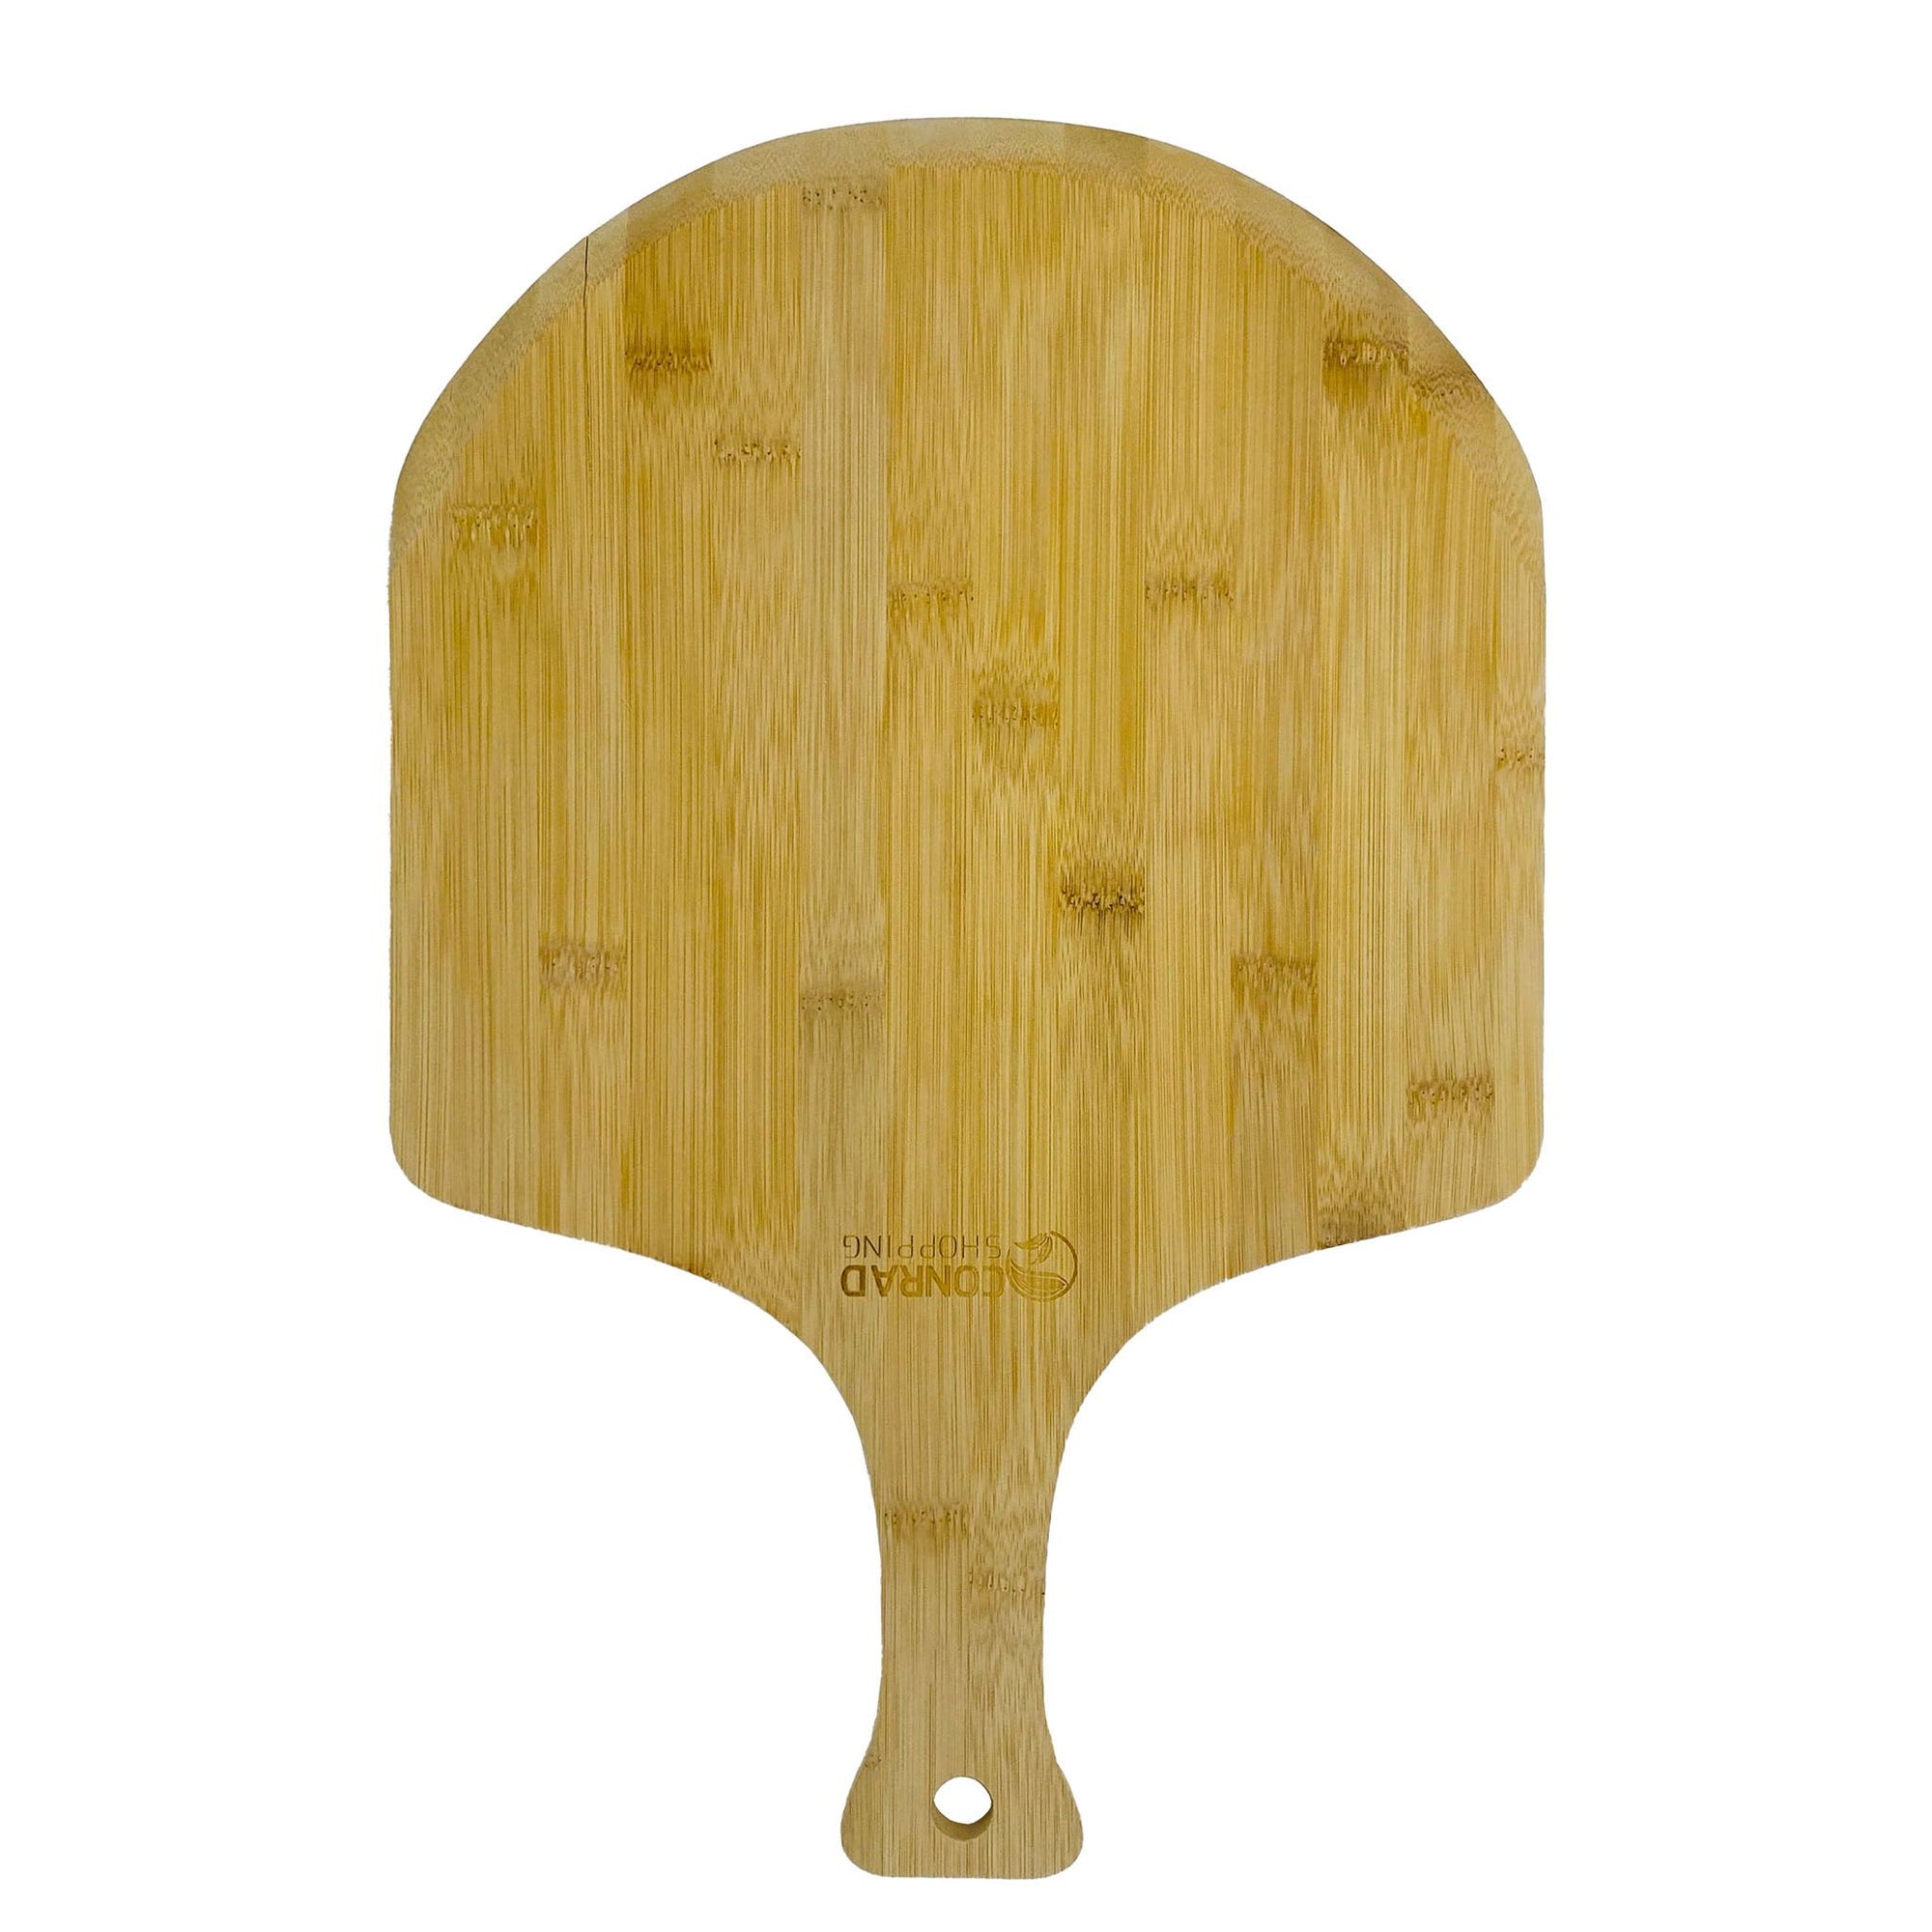 Wooden Pizza Peel Small | Shovel for Lifting Pizza